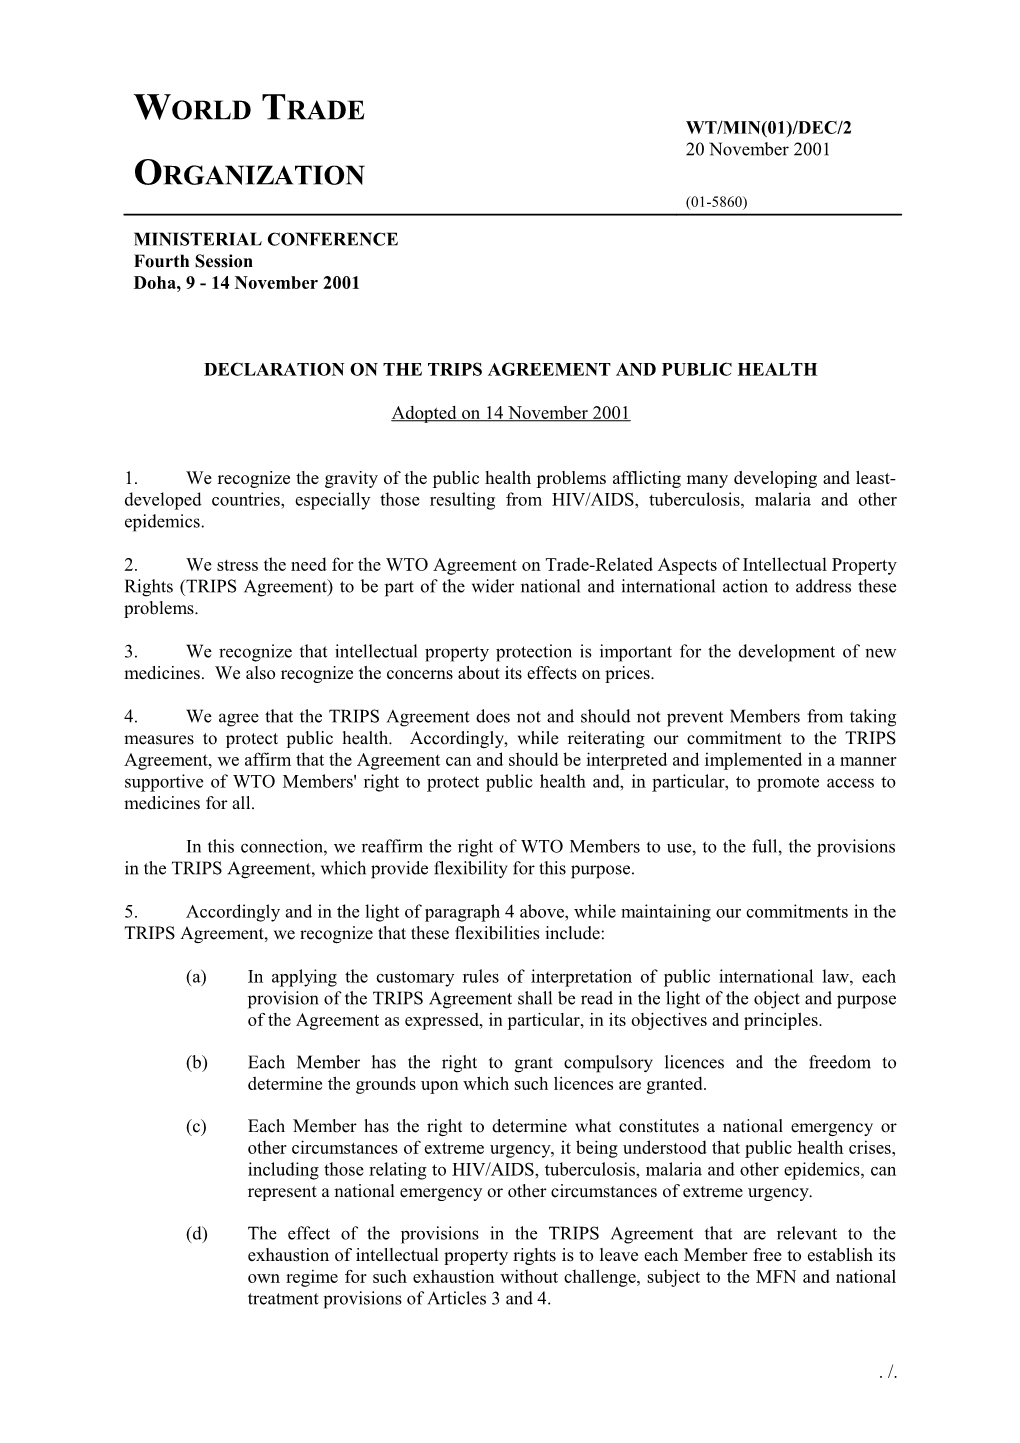 Declaration on the Trips Agreement and Public Health